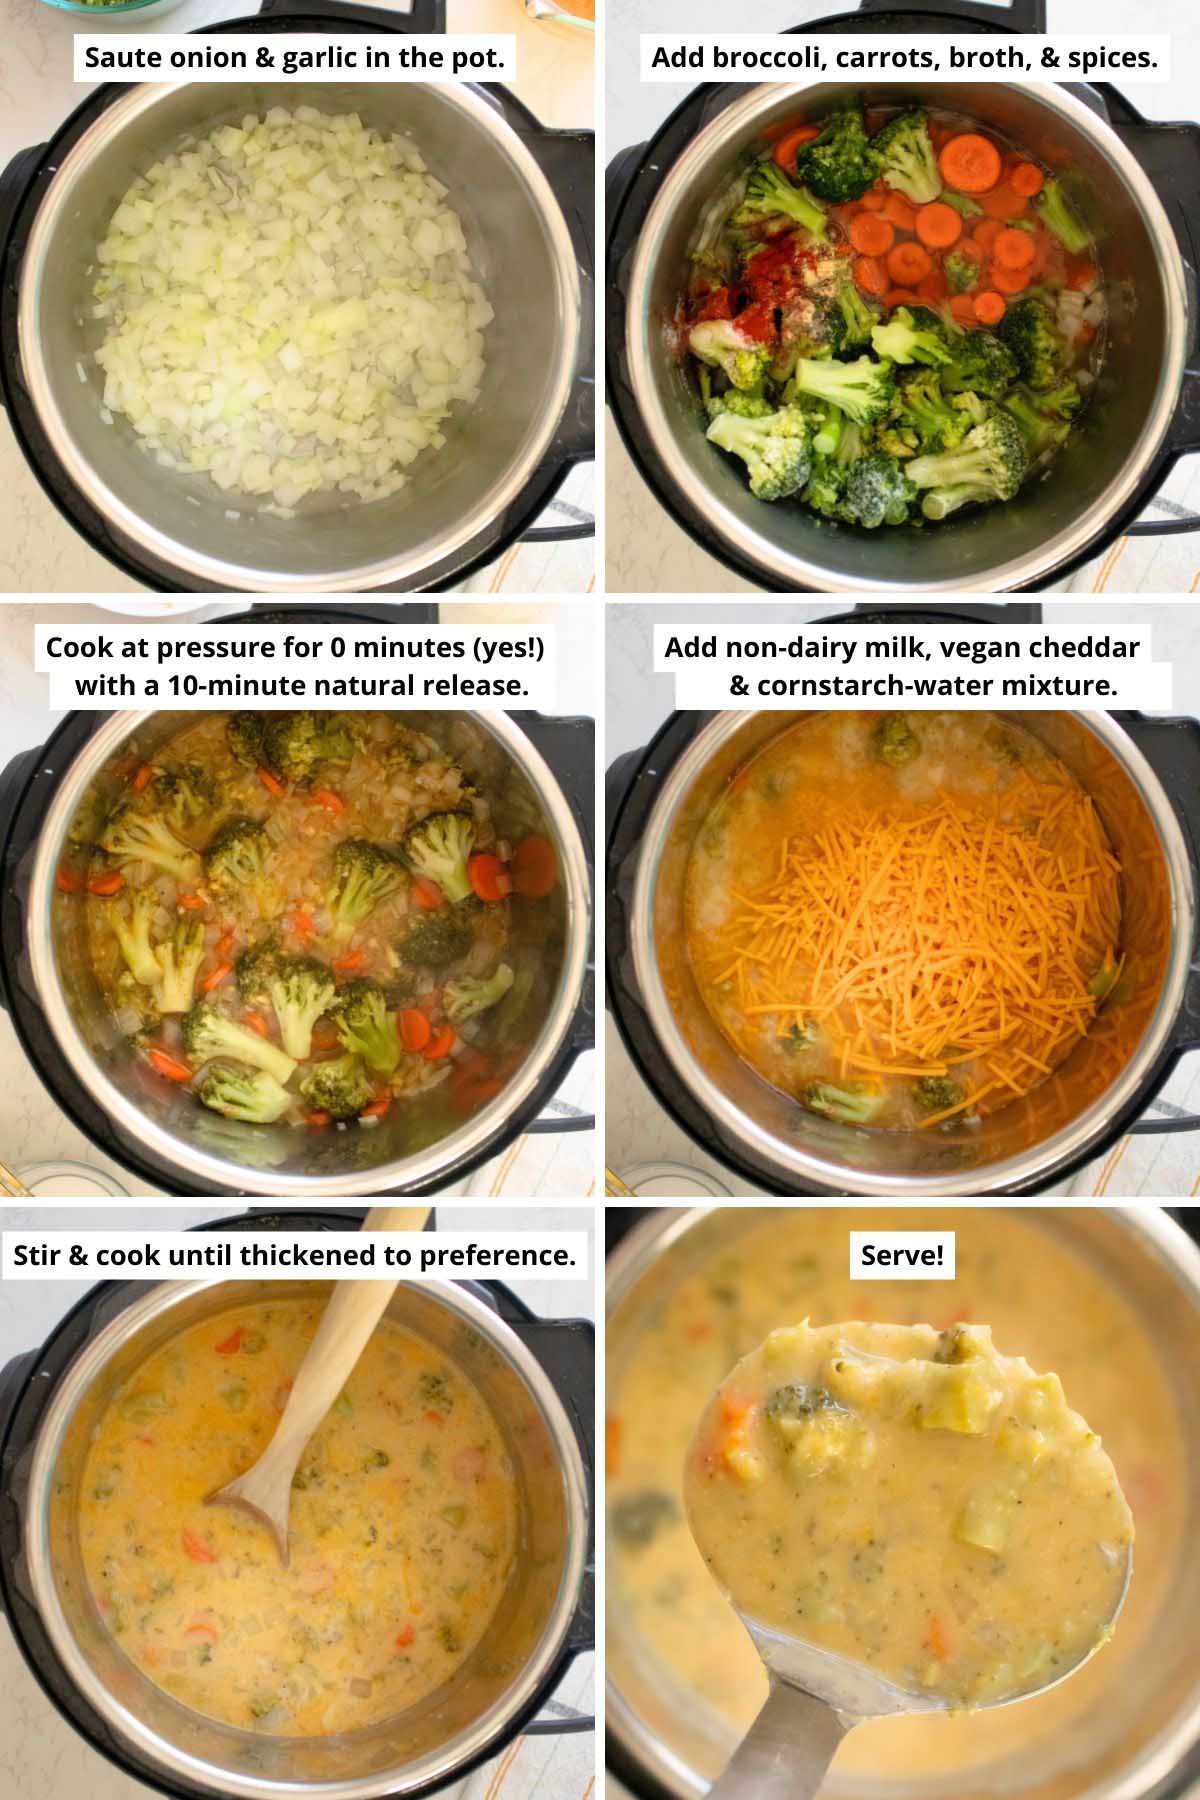 image collage showing the cooked onion and garlic, the veggies and broth in the pot before and after cooking at pressure, the vegan cheddar and milk before and after mixing in, and a ladle serving the soup from the Instant Pot